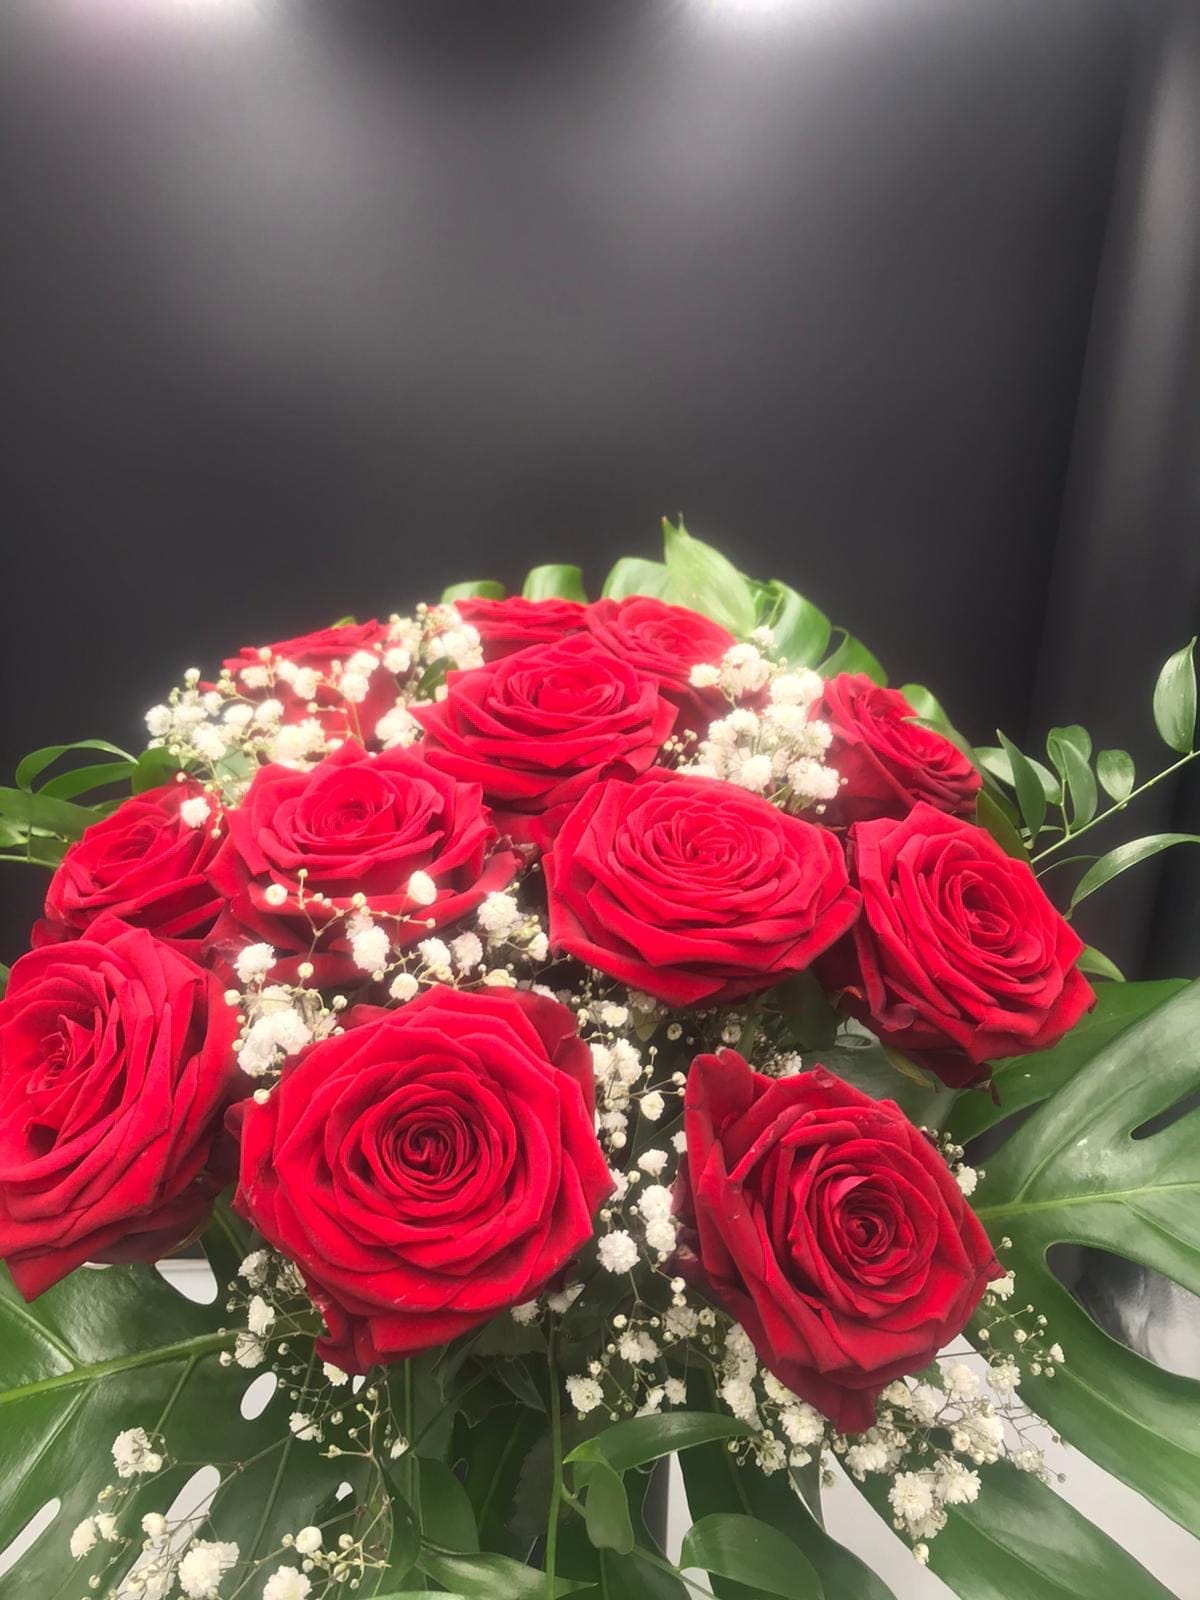 12 x 50cm Red rose and gyp hand tie - Harrys Flowers London